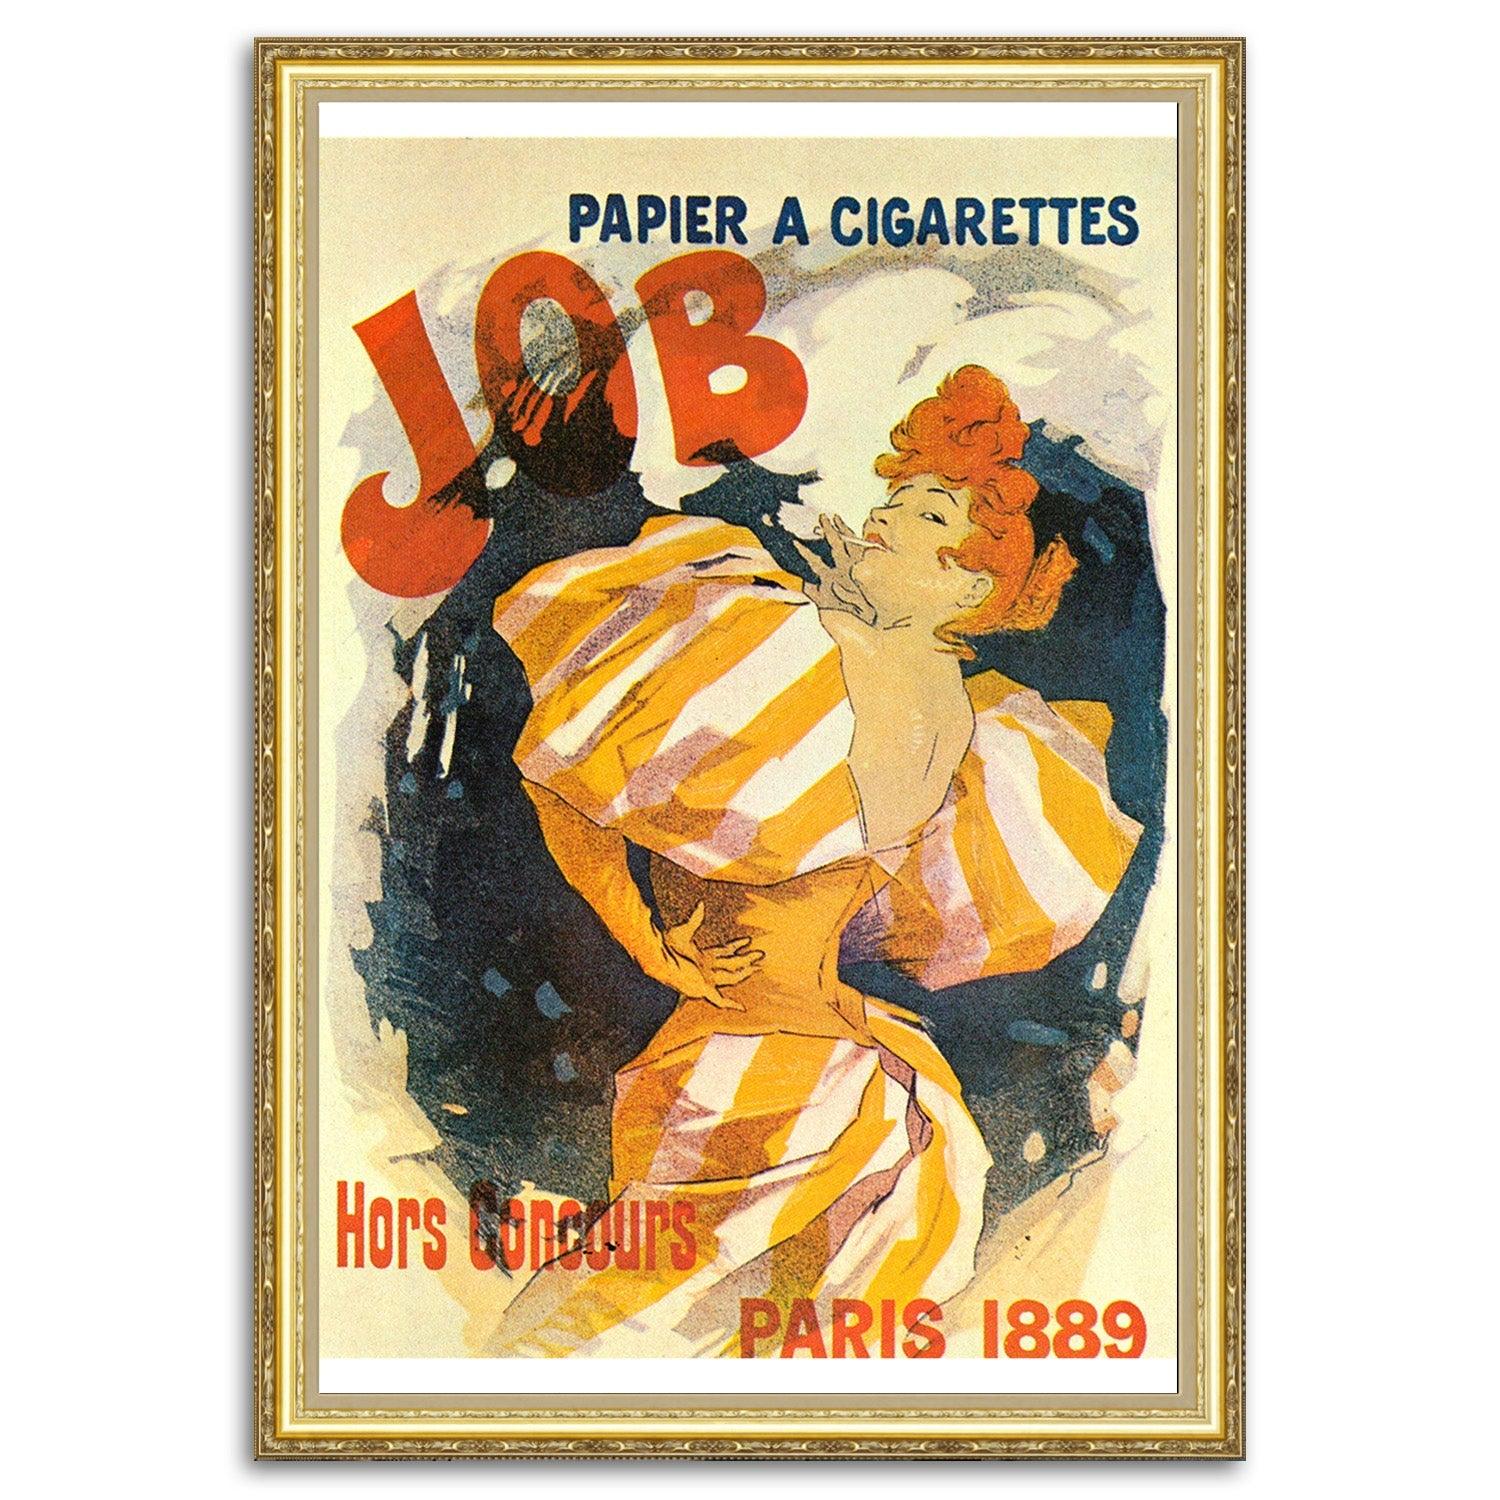 Experience the timeless charm of "JOB, PAPIER A CIGARETTES," a captivating collage featuring an iconic cigaret paper advertisement design by Jules Chéret, a renowned French graphic designer (1836-1932). Created in 1889, this artwork seamlessly combines history and artistic brilliance.